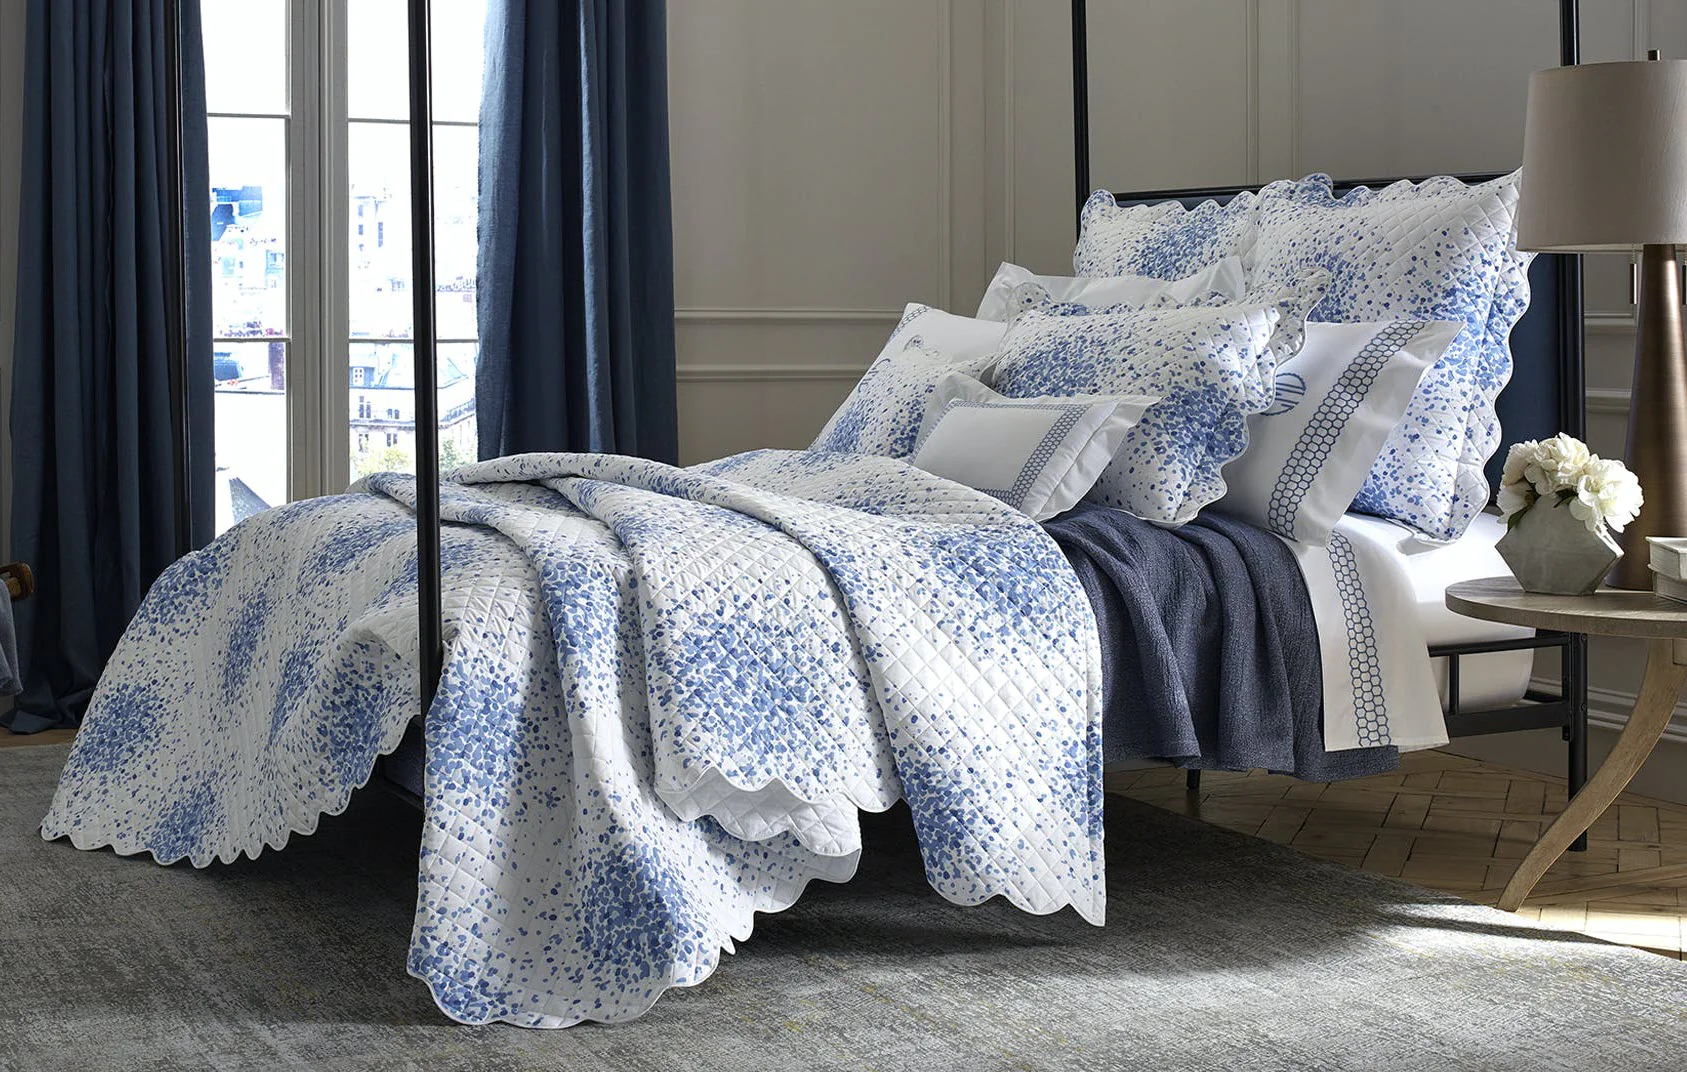 Experience Luxury with These Exquisite Duvet Covers